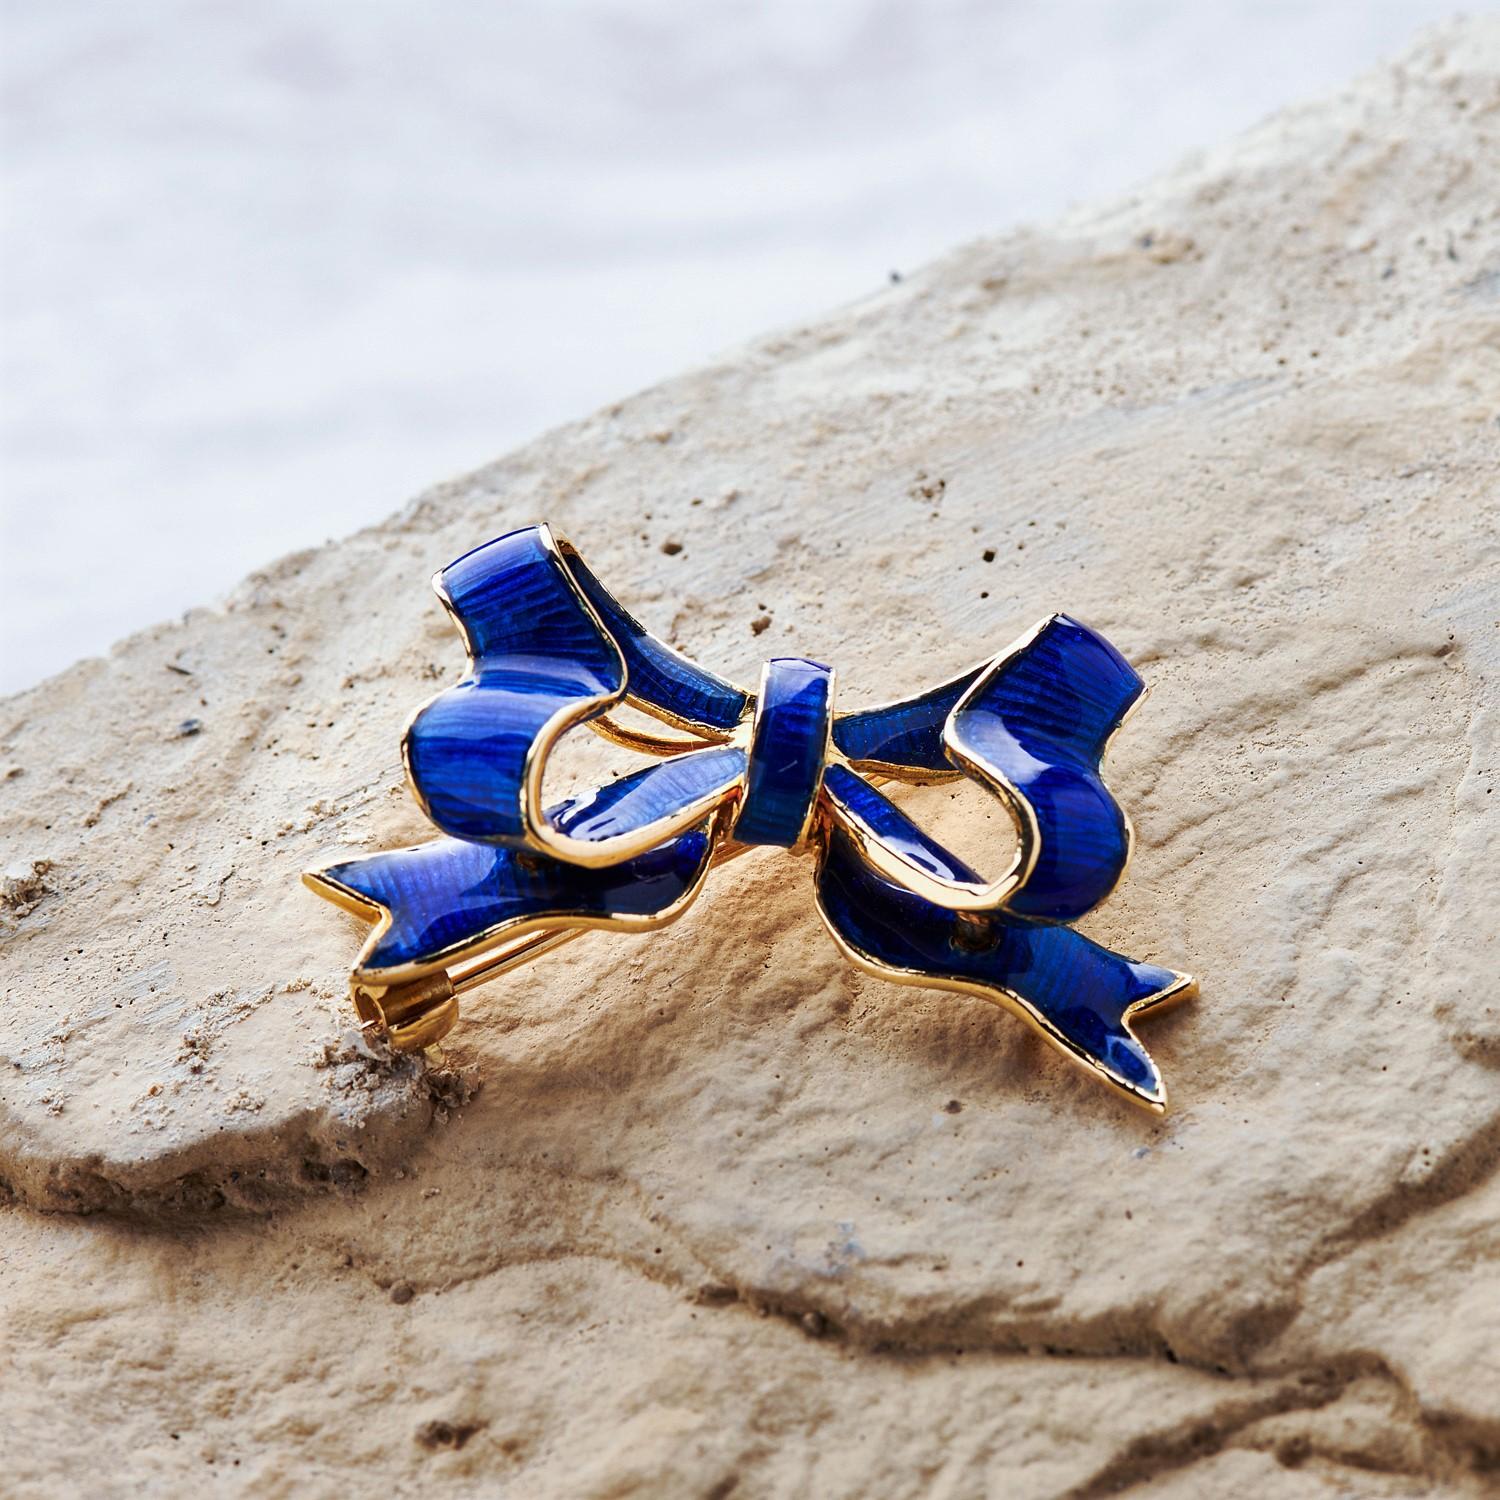 DEAKIN & FRANCIS, Piccadilly Arcade, London

This one of a kind 18kt yellow gold with blue enamel bow brooch is a must have addition to your jewellery box. The perfect gift for a loved one this stunning brooch has been delicately hand enamelled with